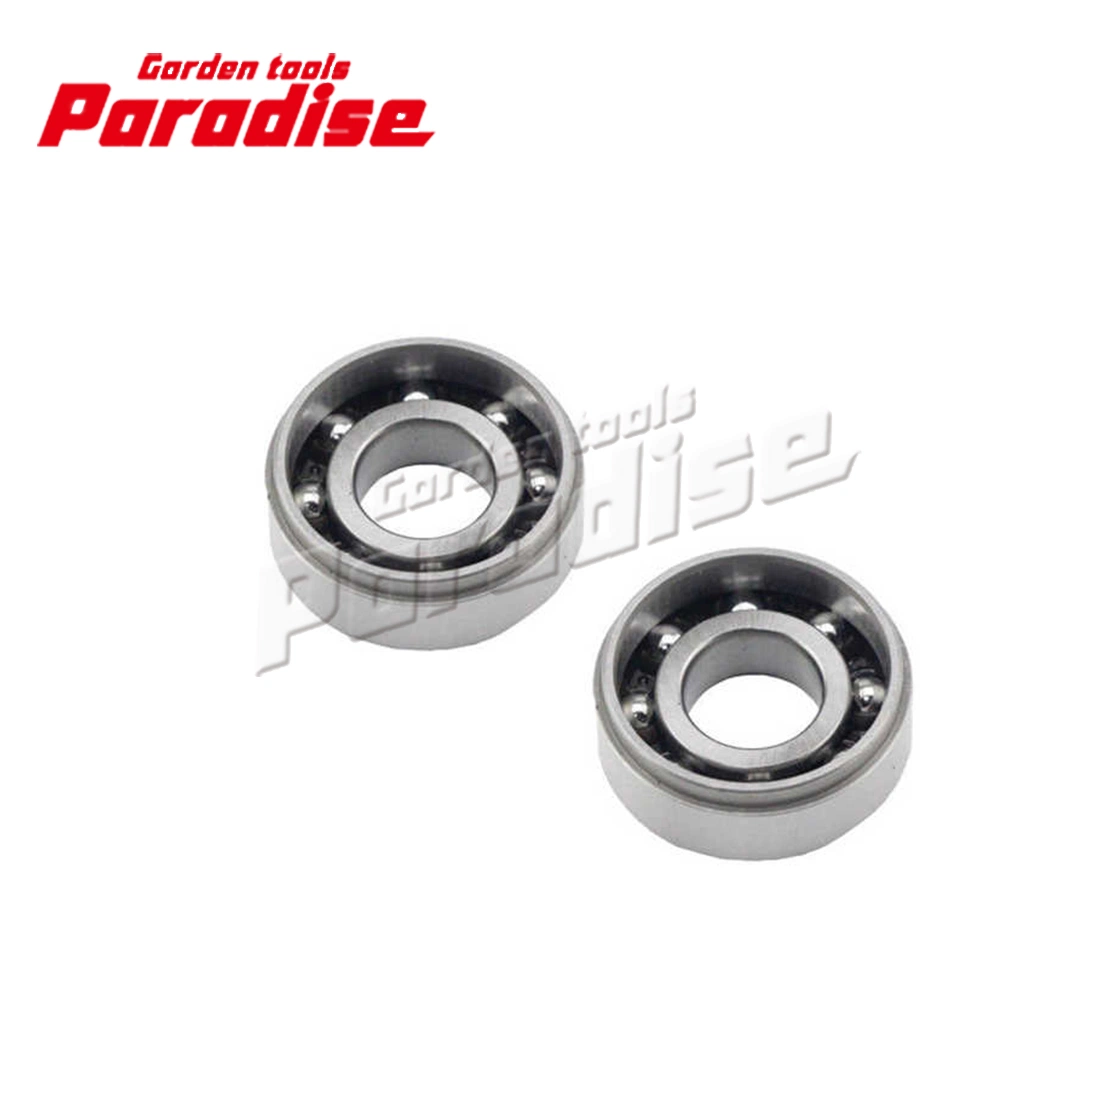 MS240 MS260 Bearing Set Fit for STIHL Chain Saw Parts